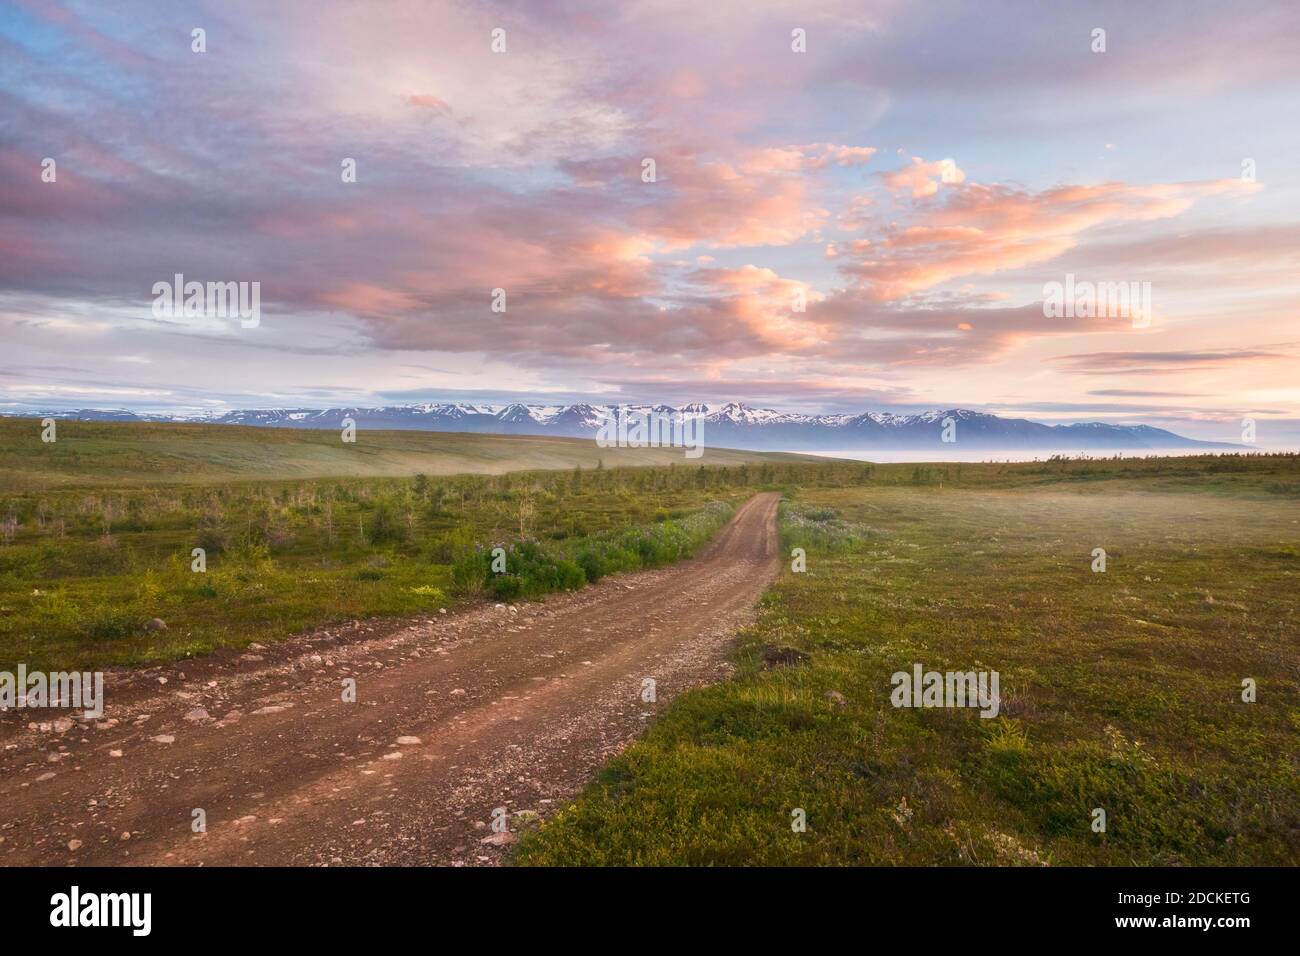 Gravel road through plain in autumn in the evening light, snow-covered mountains in the back, Norourping, Norourland eystra, Iceland Stock Photo